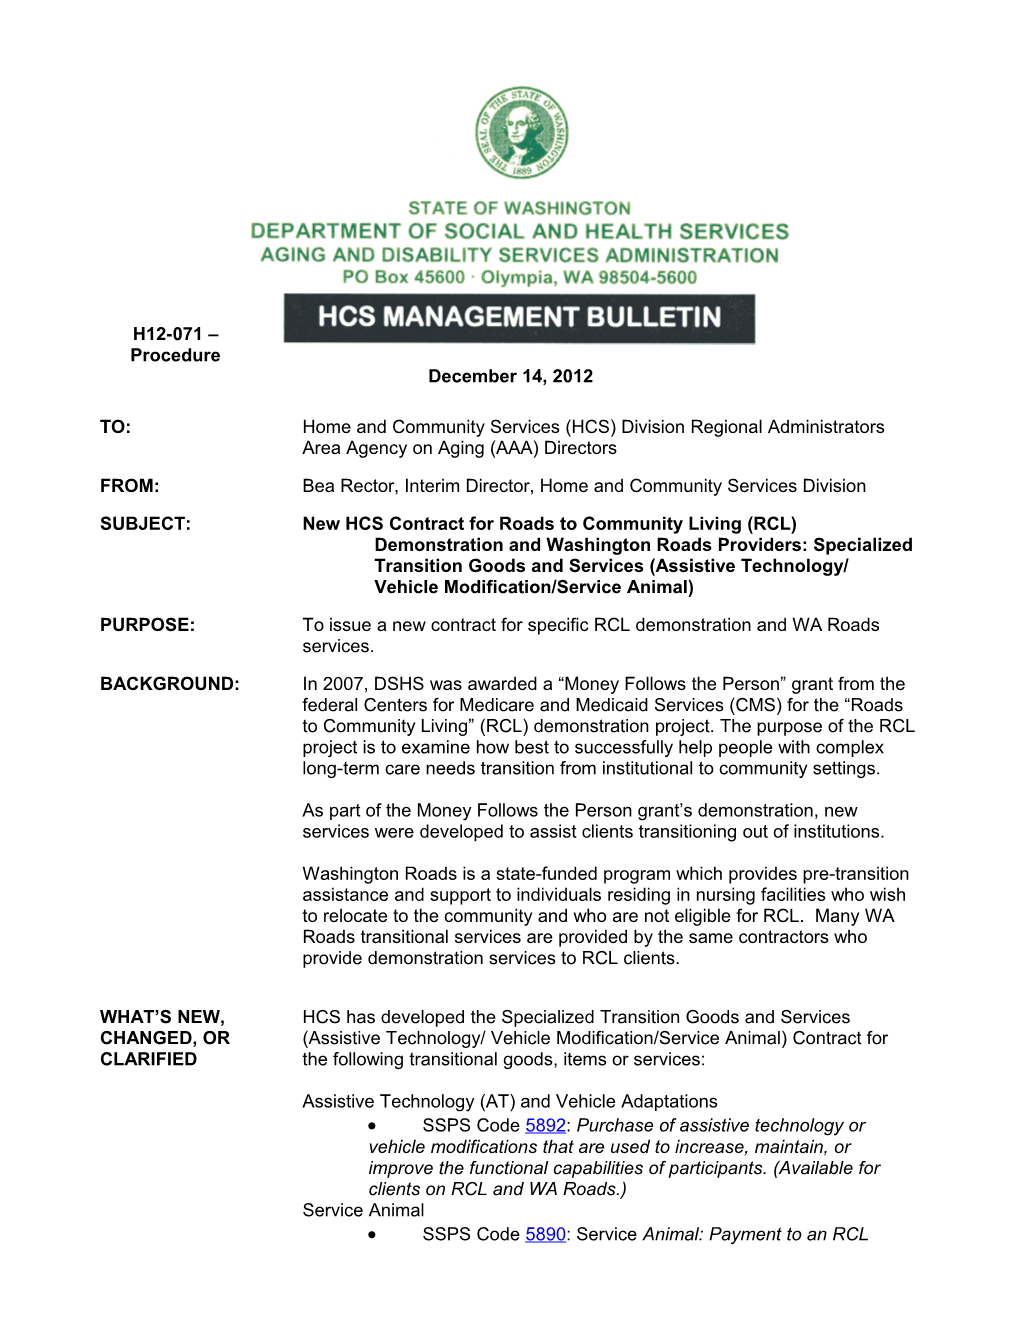 New HCS Contract for Roads to Community Living (RCL) Demonstration and Washington Roads